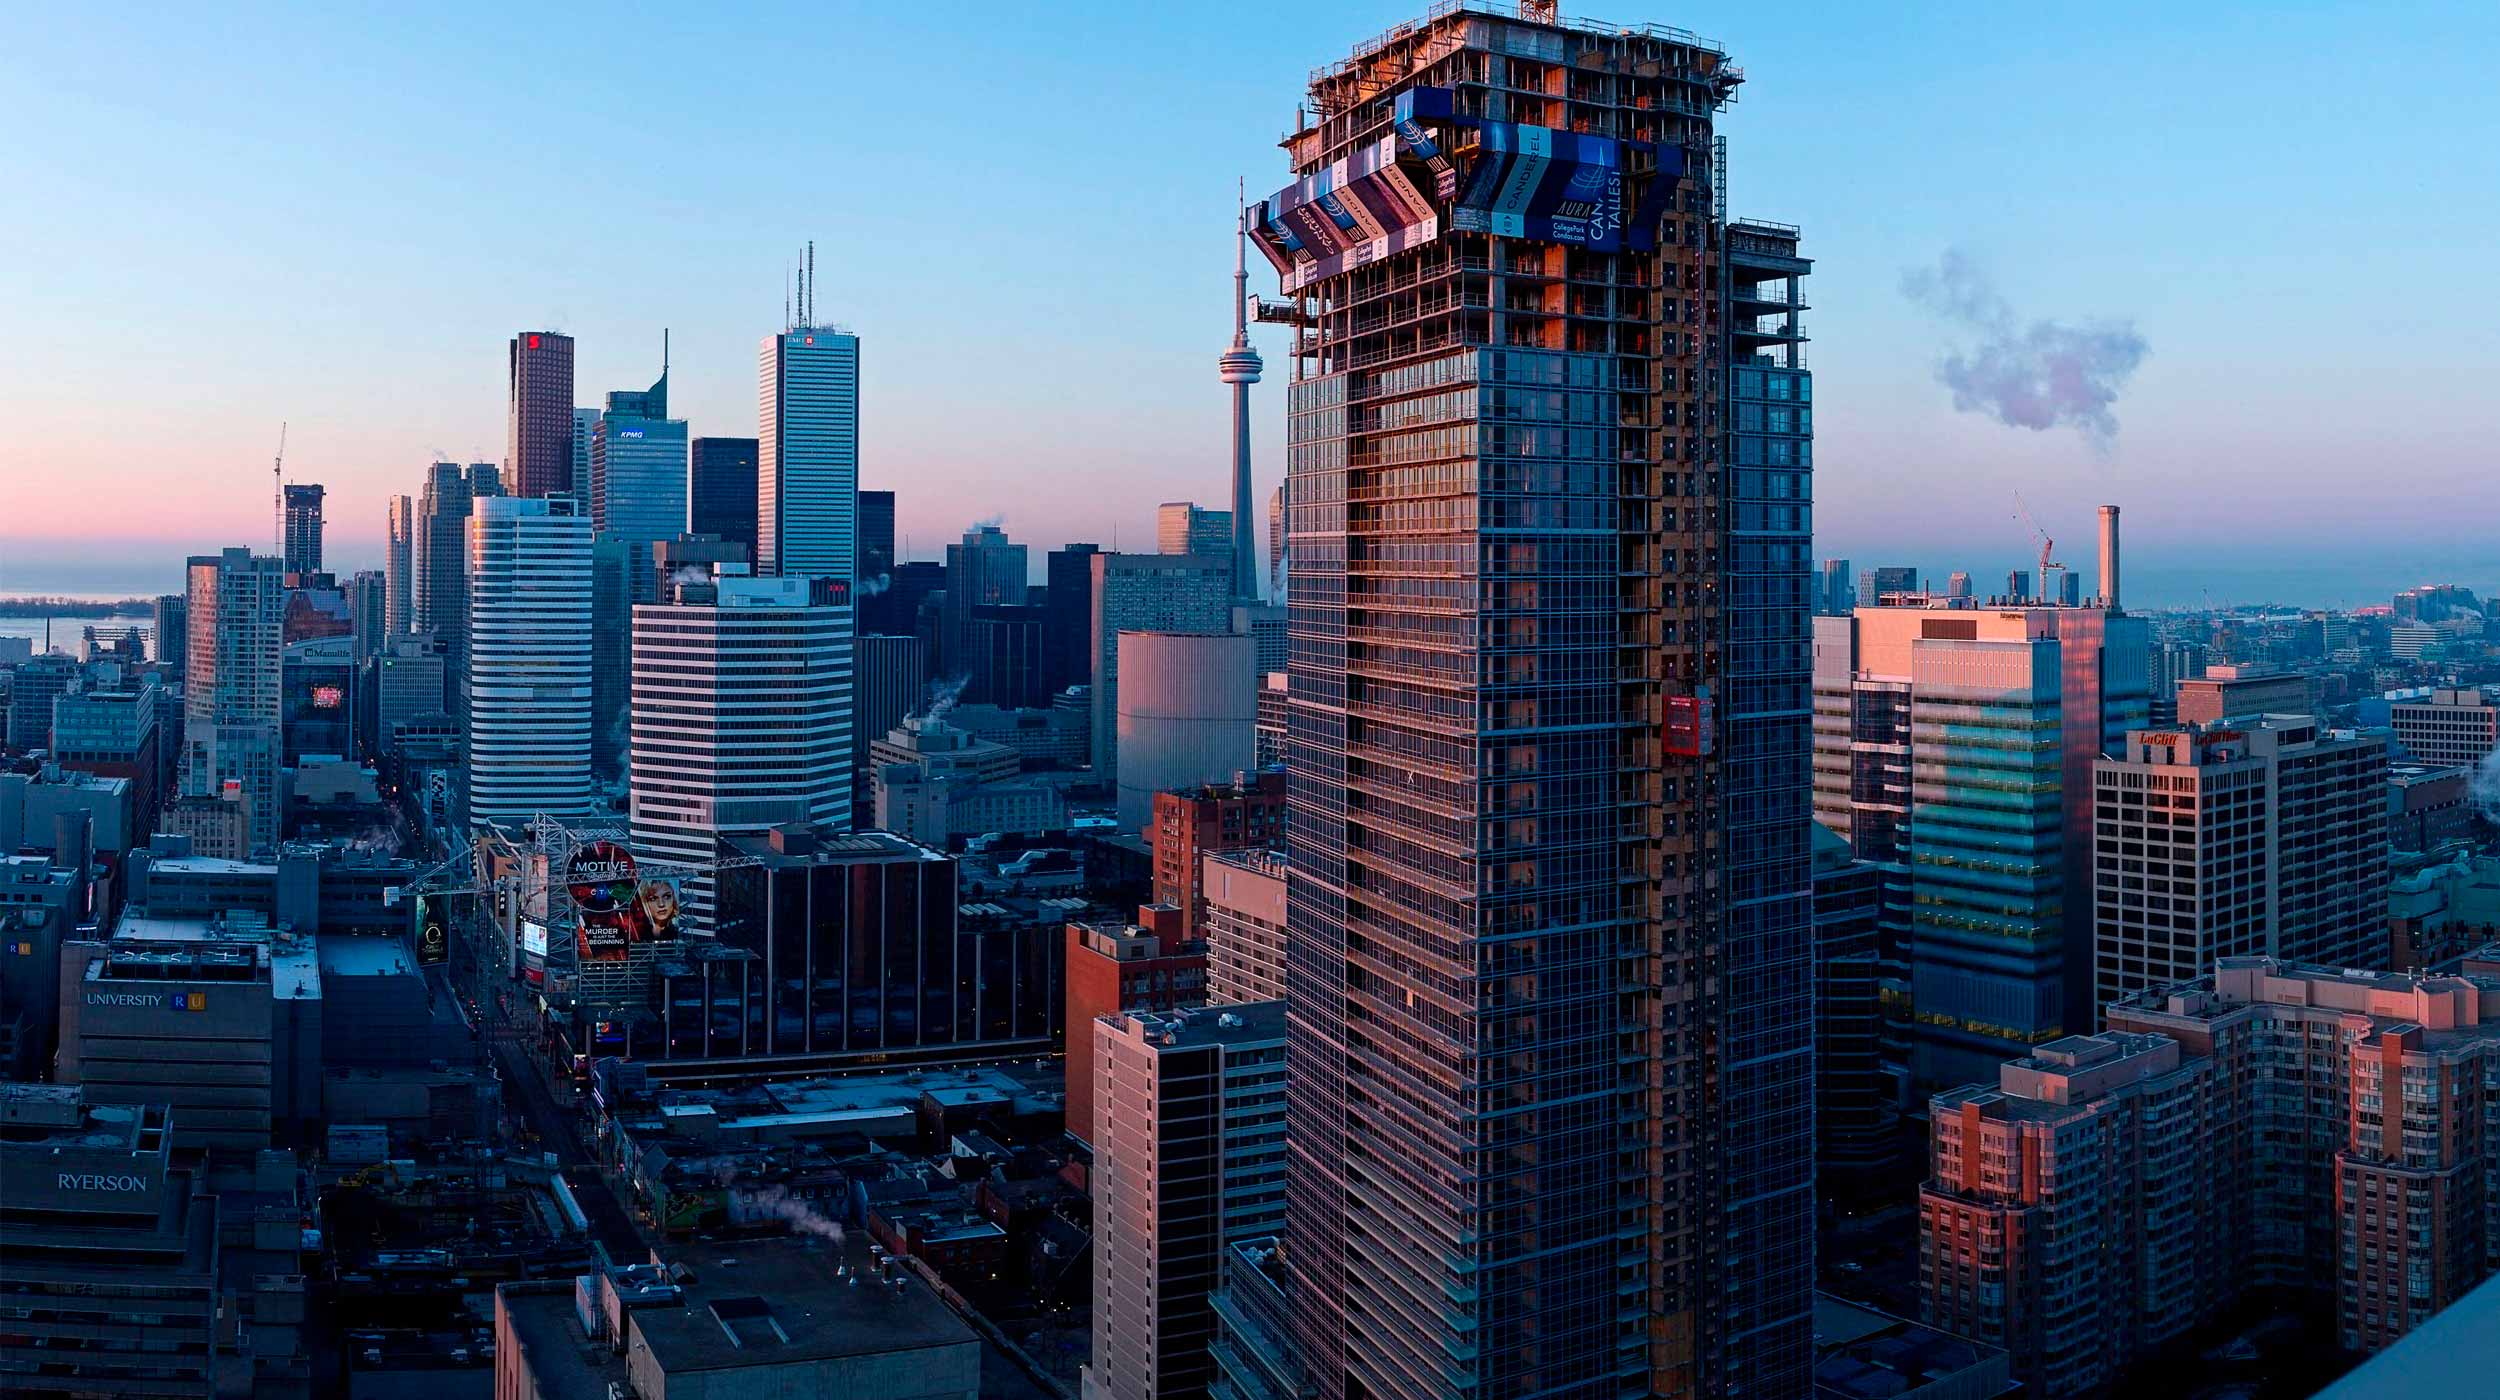 With a height of 272.8 m and 78 floors, Toronto’s Aura Tower is the tallest residential building in Canada.